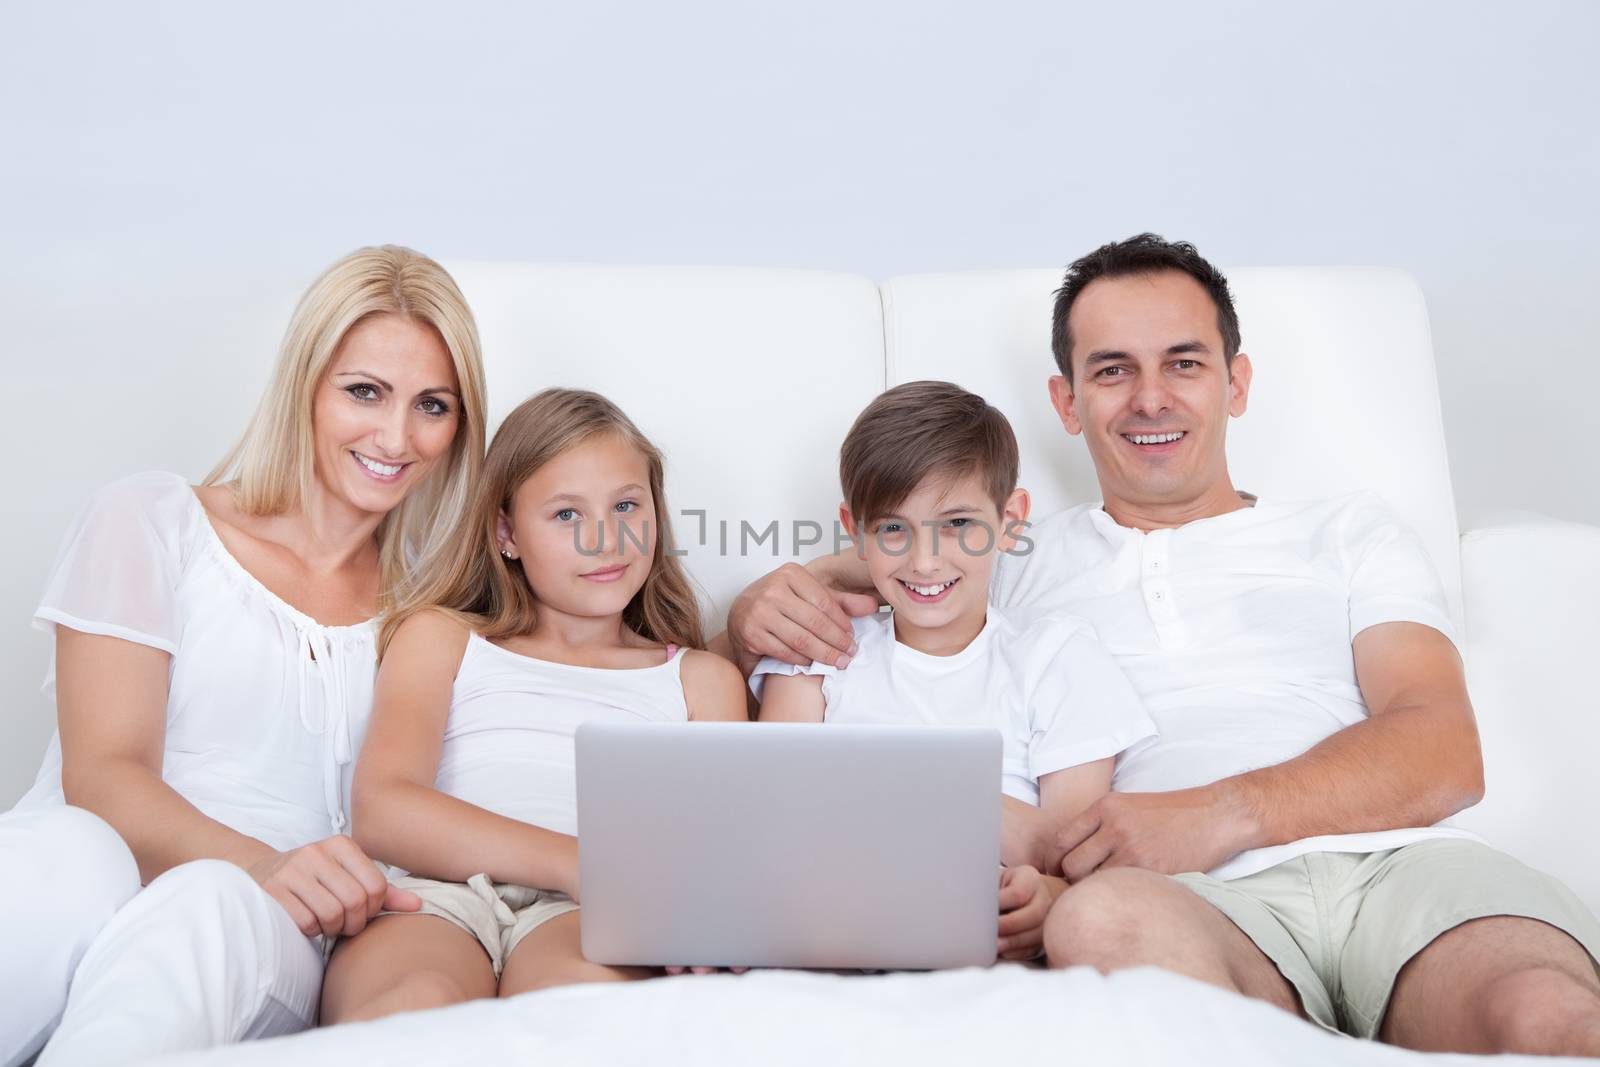 Portrait Of Happy Family With Two Children Sitting On Bed In Bedroom